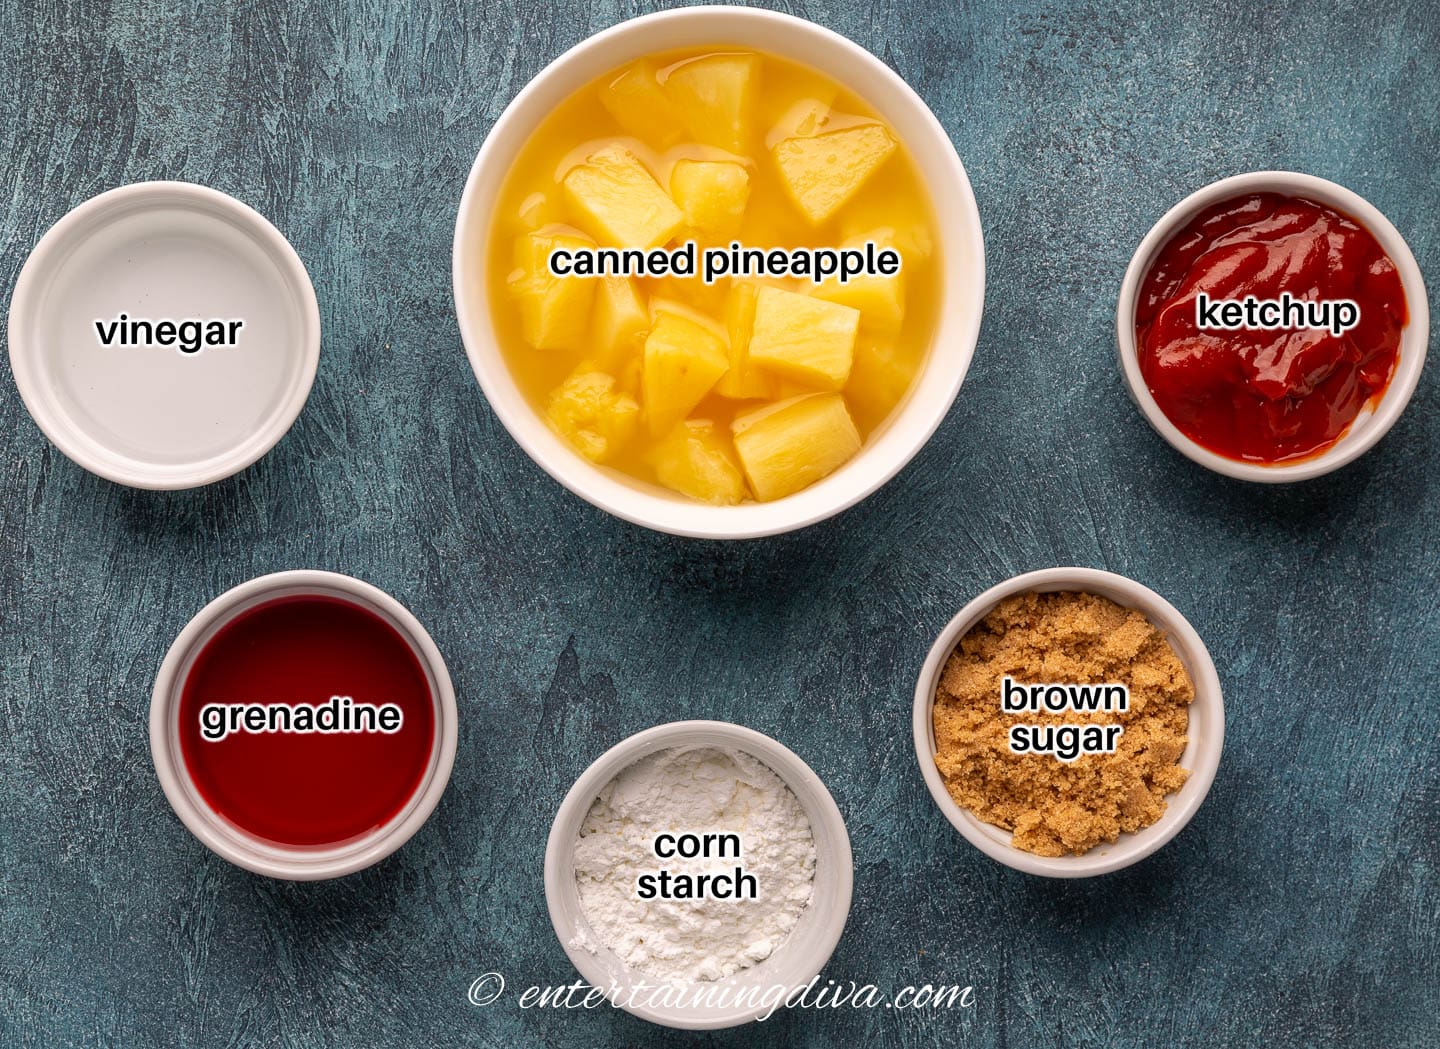 Ingredients for sweet and sour sauce - canned pineapple chunks, ketchup, brown sugar, corn starch, grenadine and vinegar